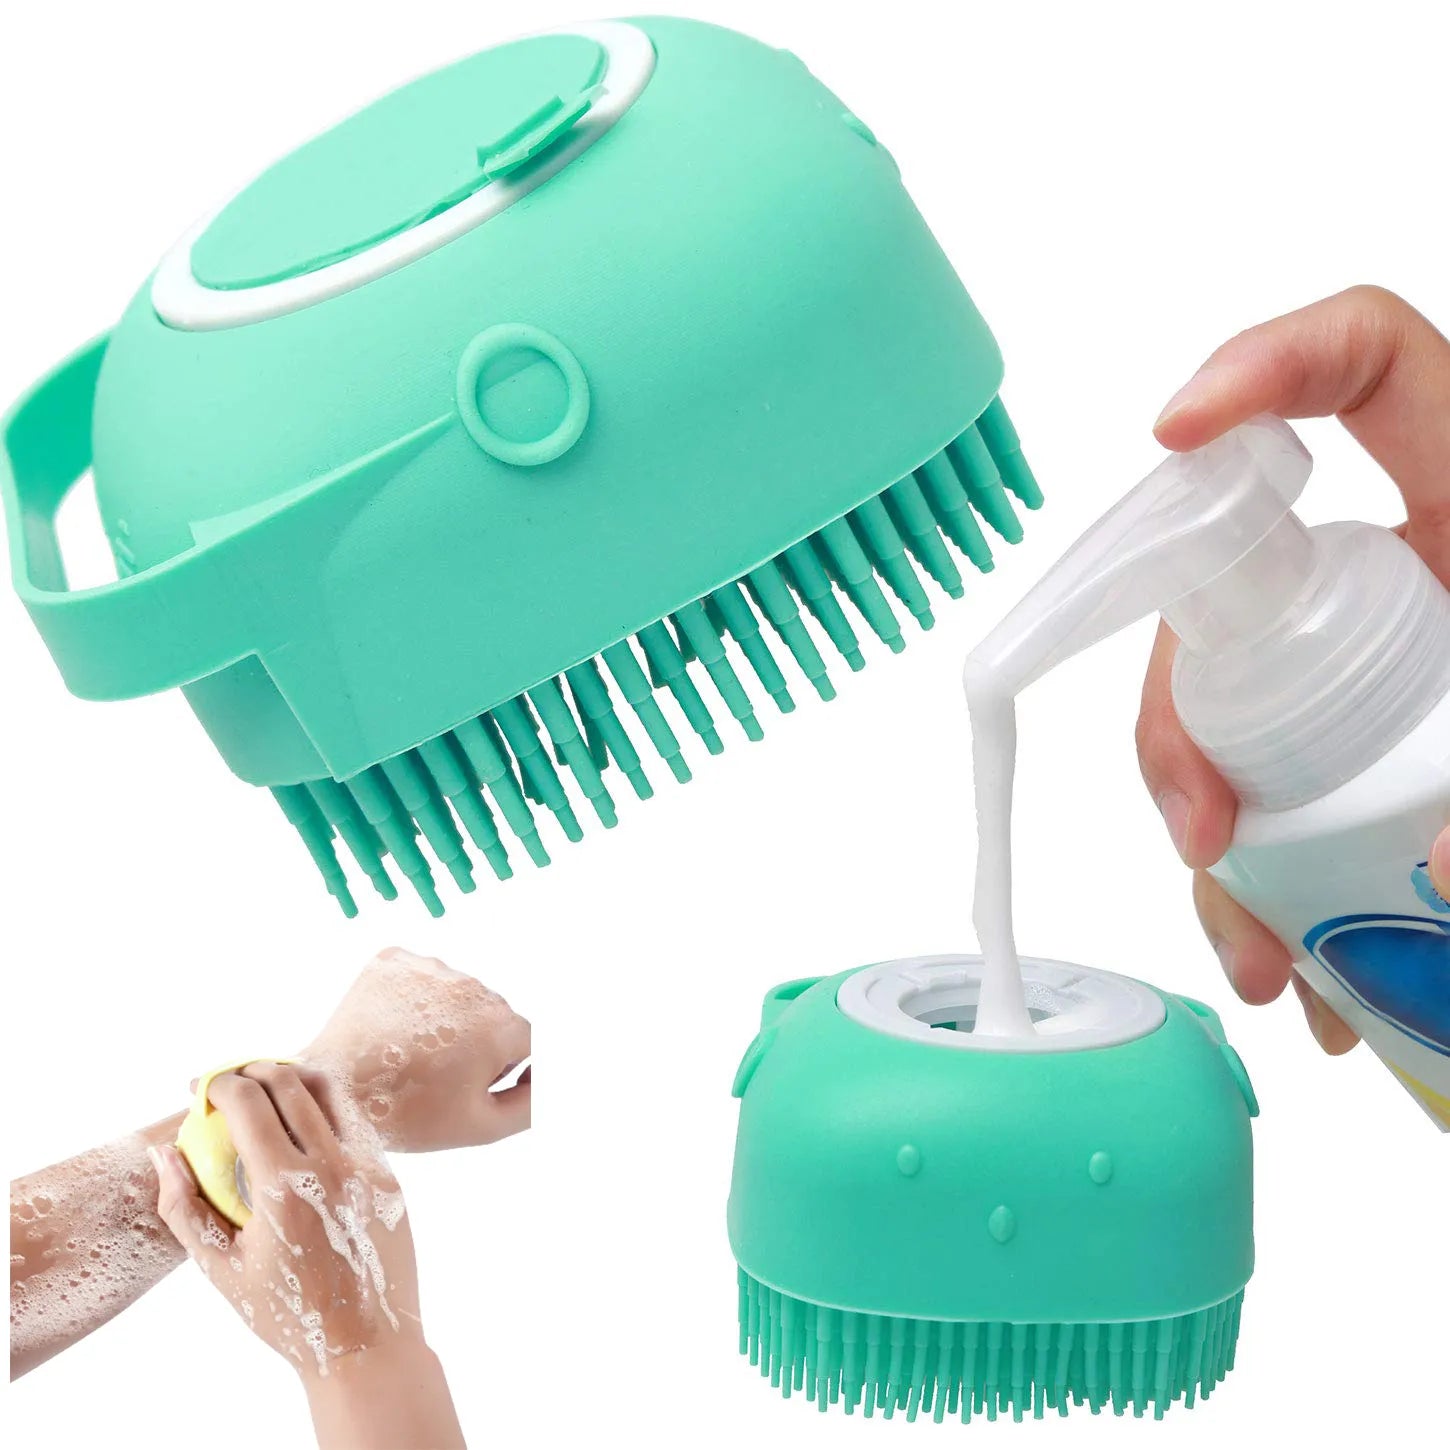 "Paws & Relax 2-in-1 Pet SPA Brush"